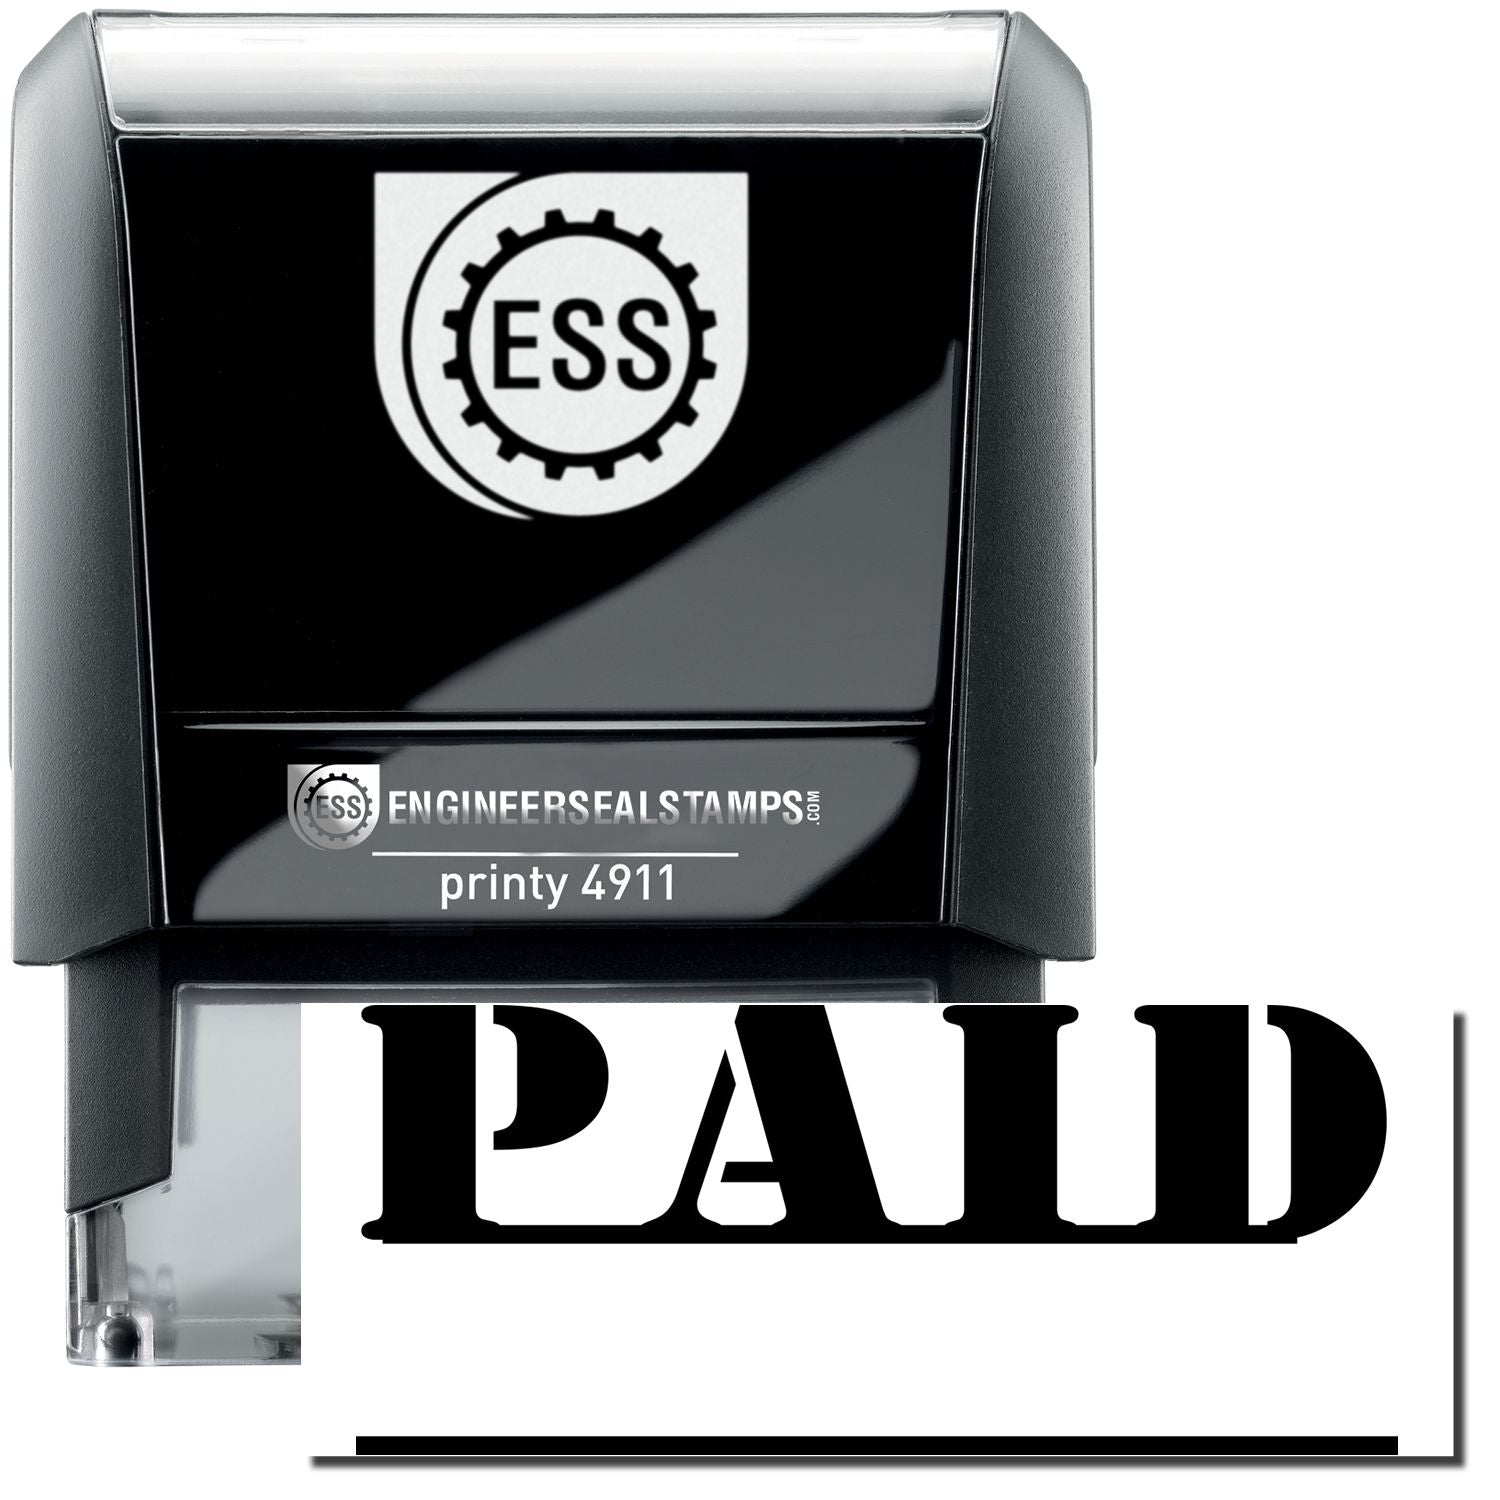 A self-inking stamp with a stamped image showing how the text "PAID" in a unique large font with a line where a date can be listed is displayed after stamping.